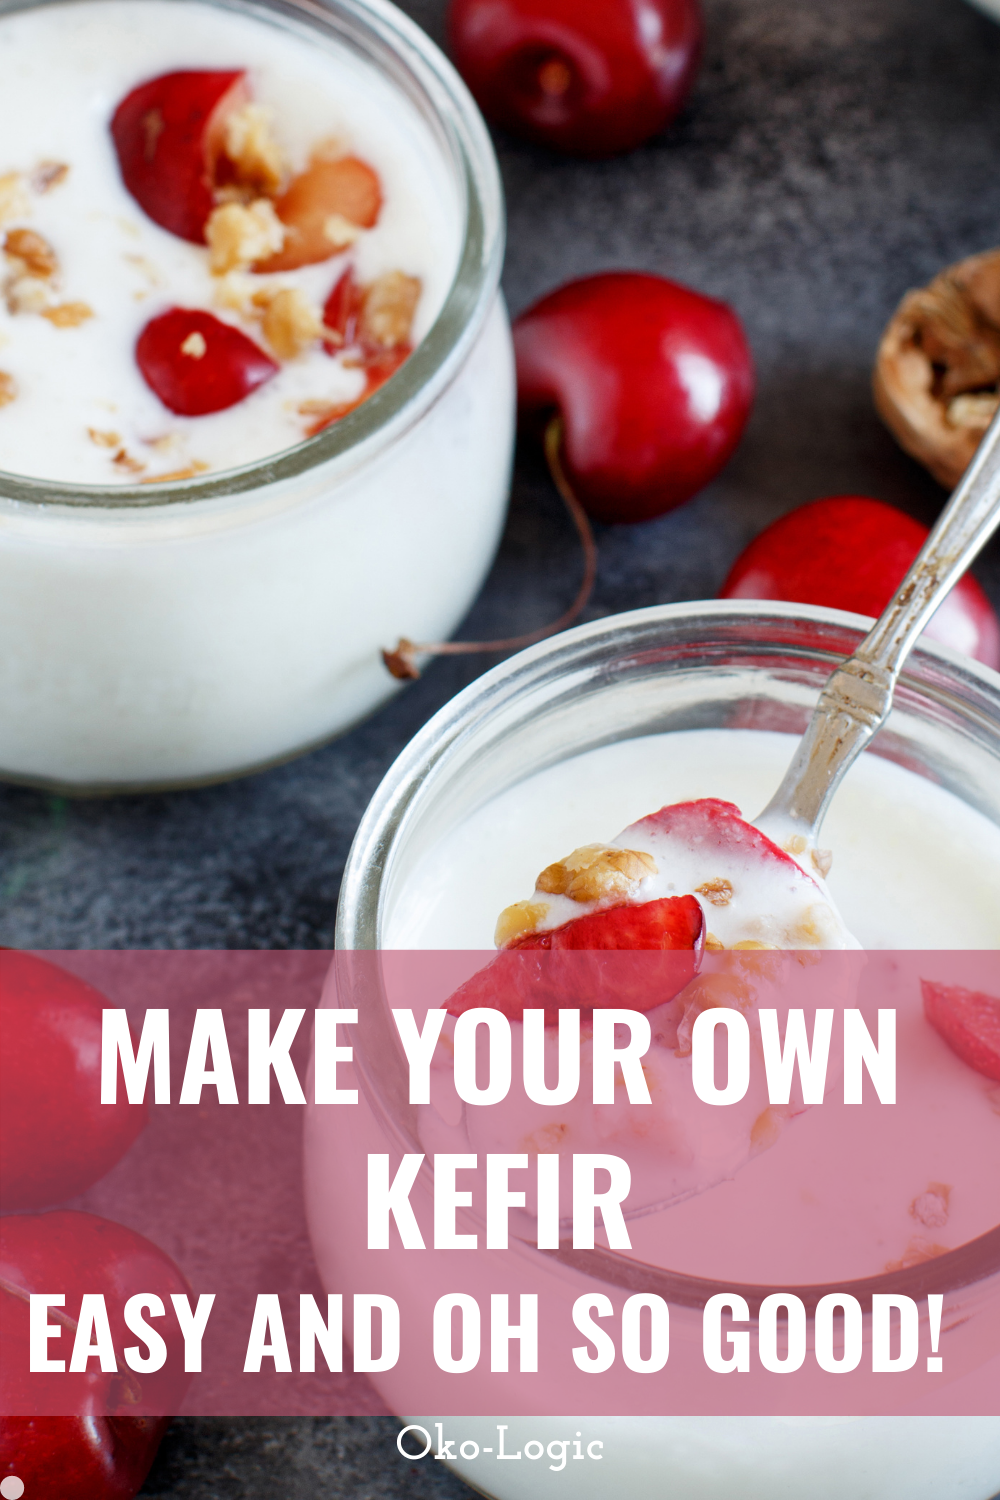 Why and How Much Kefir Should You Drink for Optimal Gut Health?